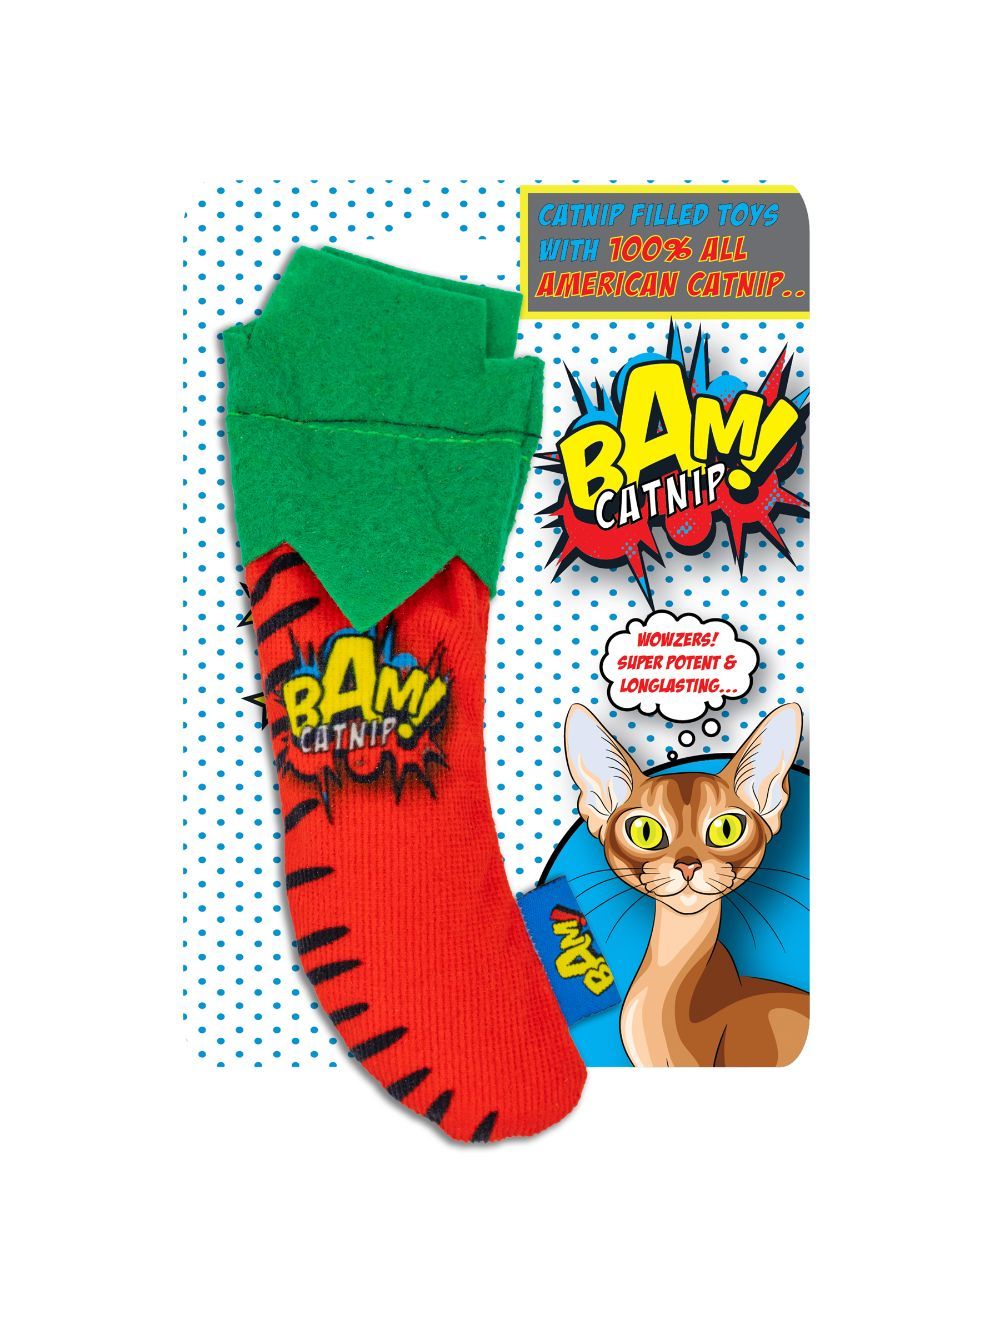 BAM! - Toy with Catnip - 16 cm - Pepper - (503319002034)